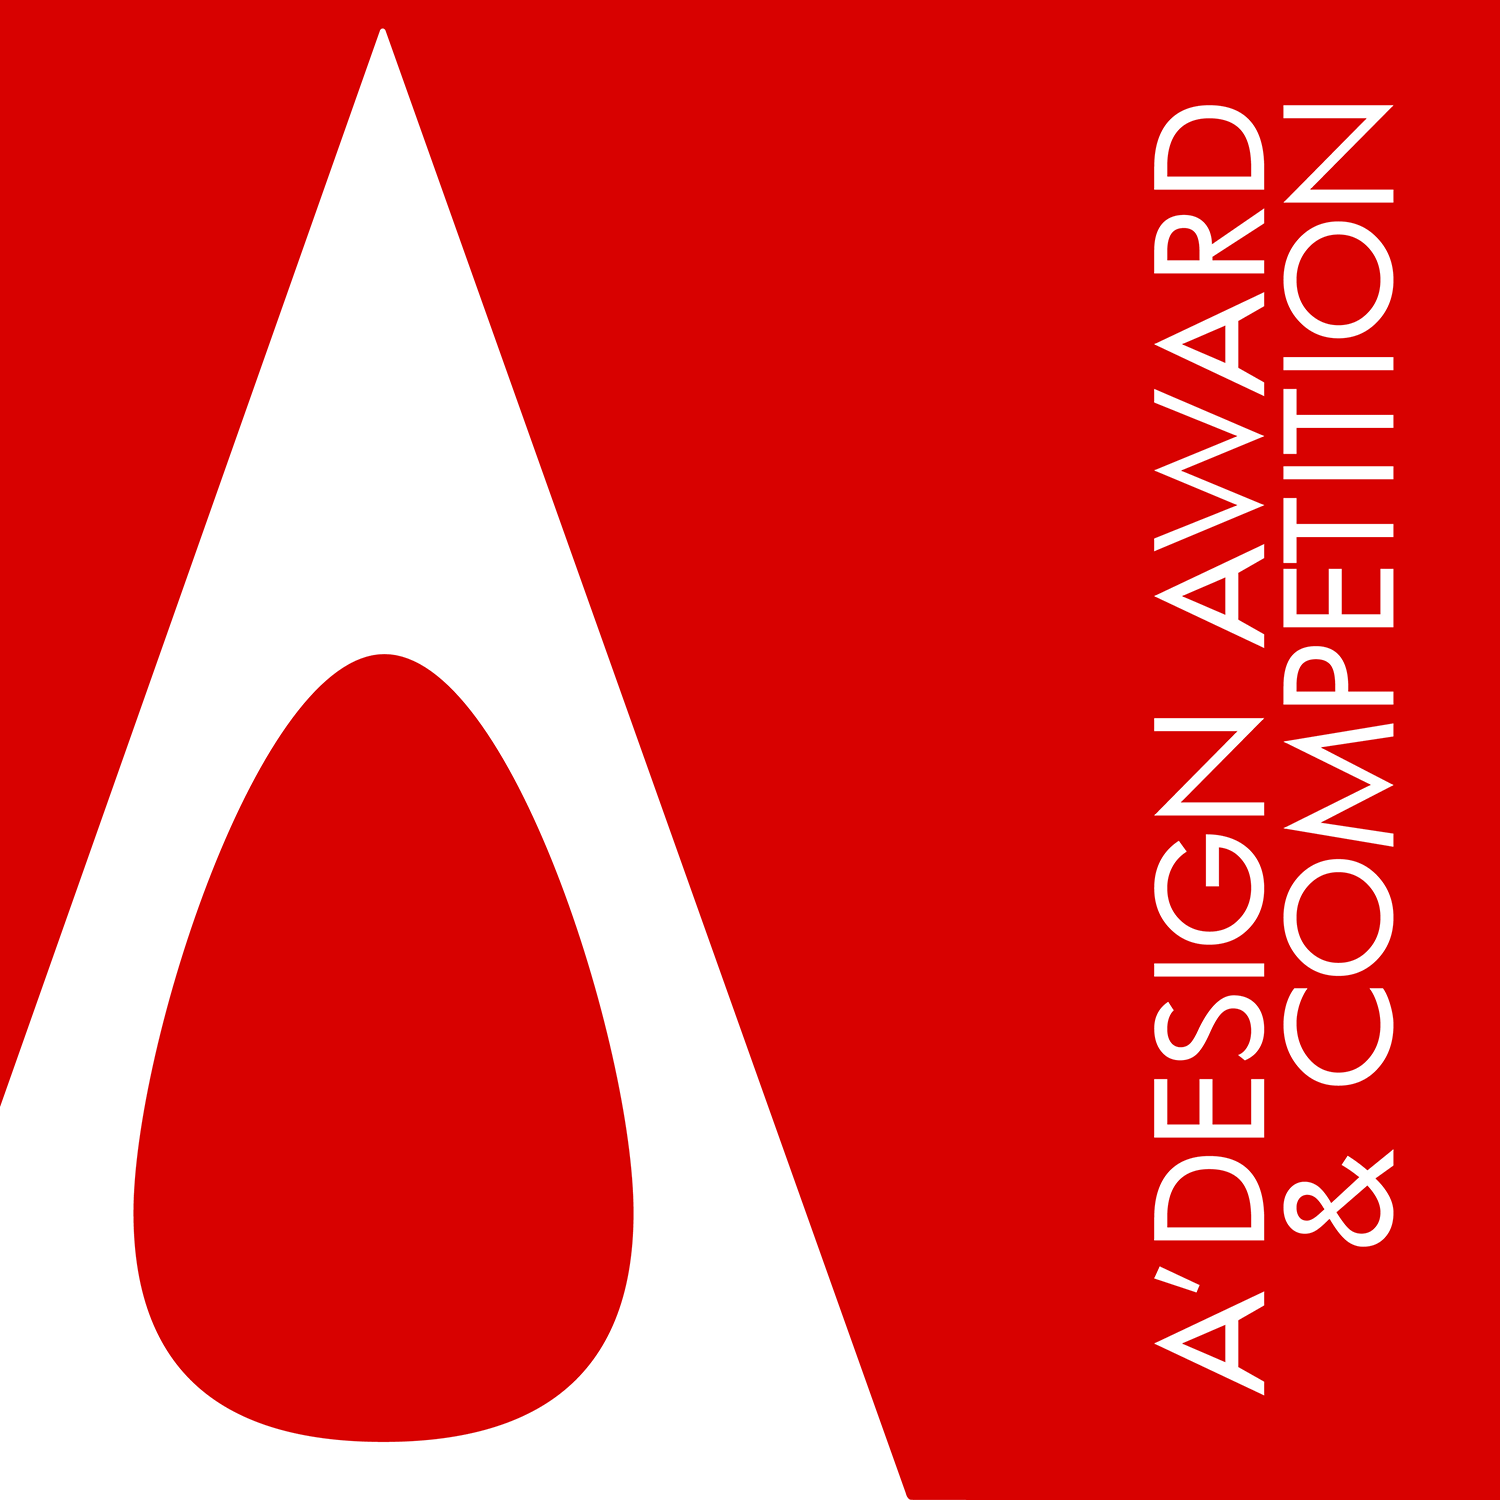 a'design award and competition logo in red and white